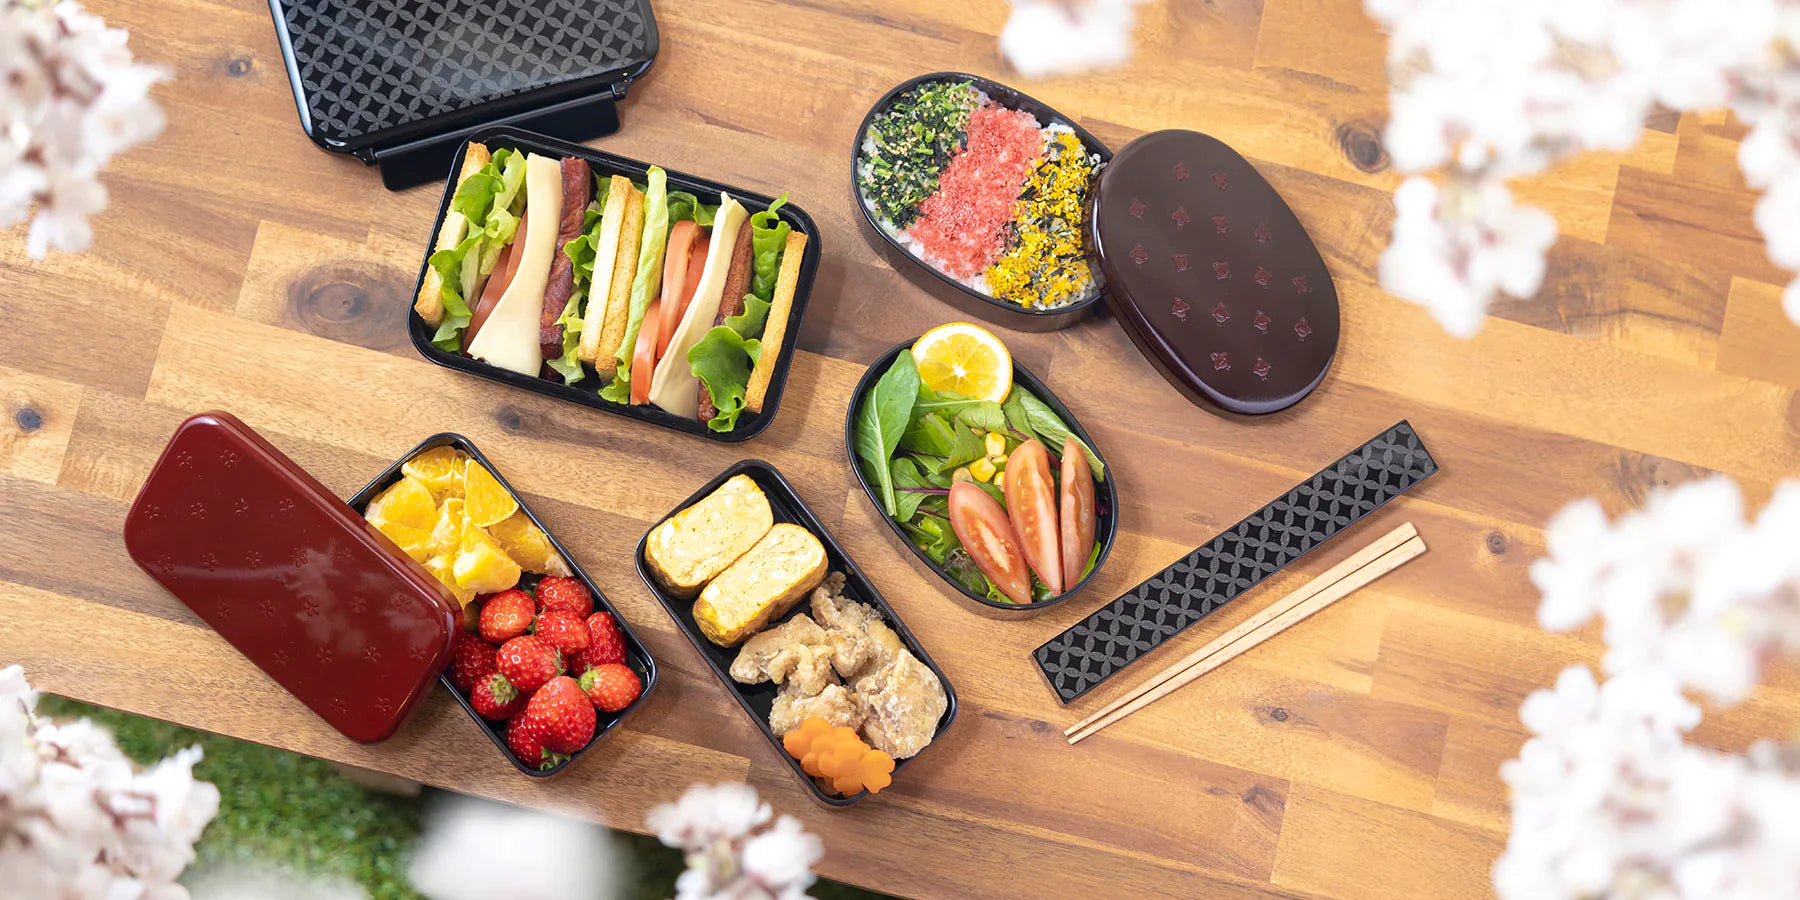 Discover our great selection of Bento supplies on Globalkitchen Japan.